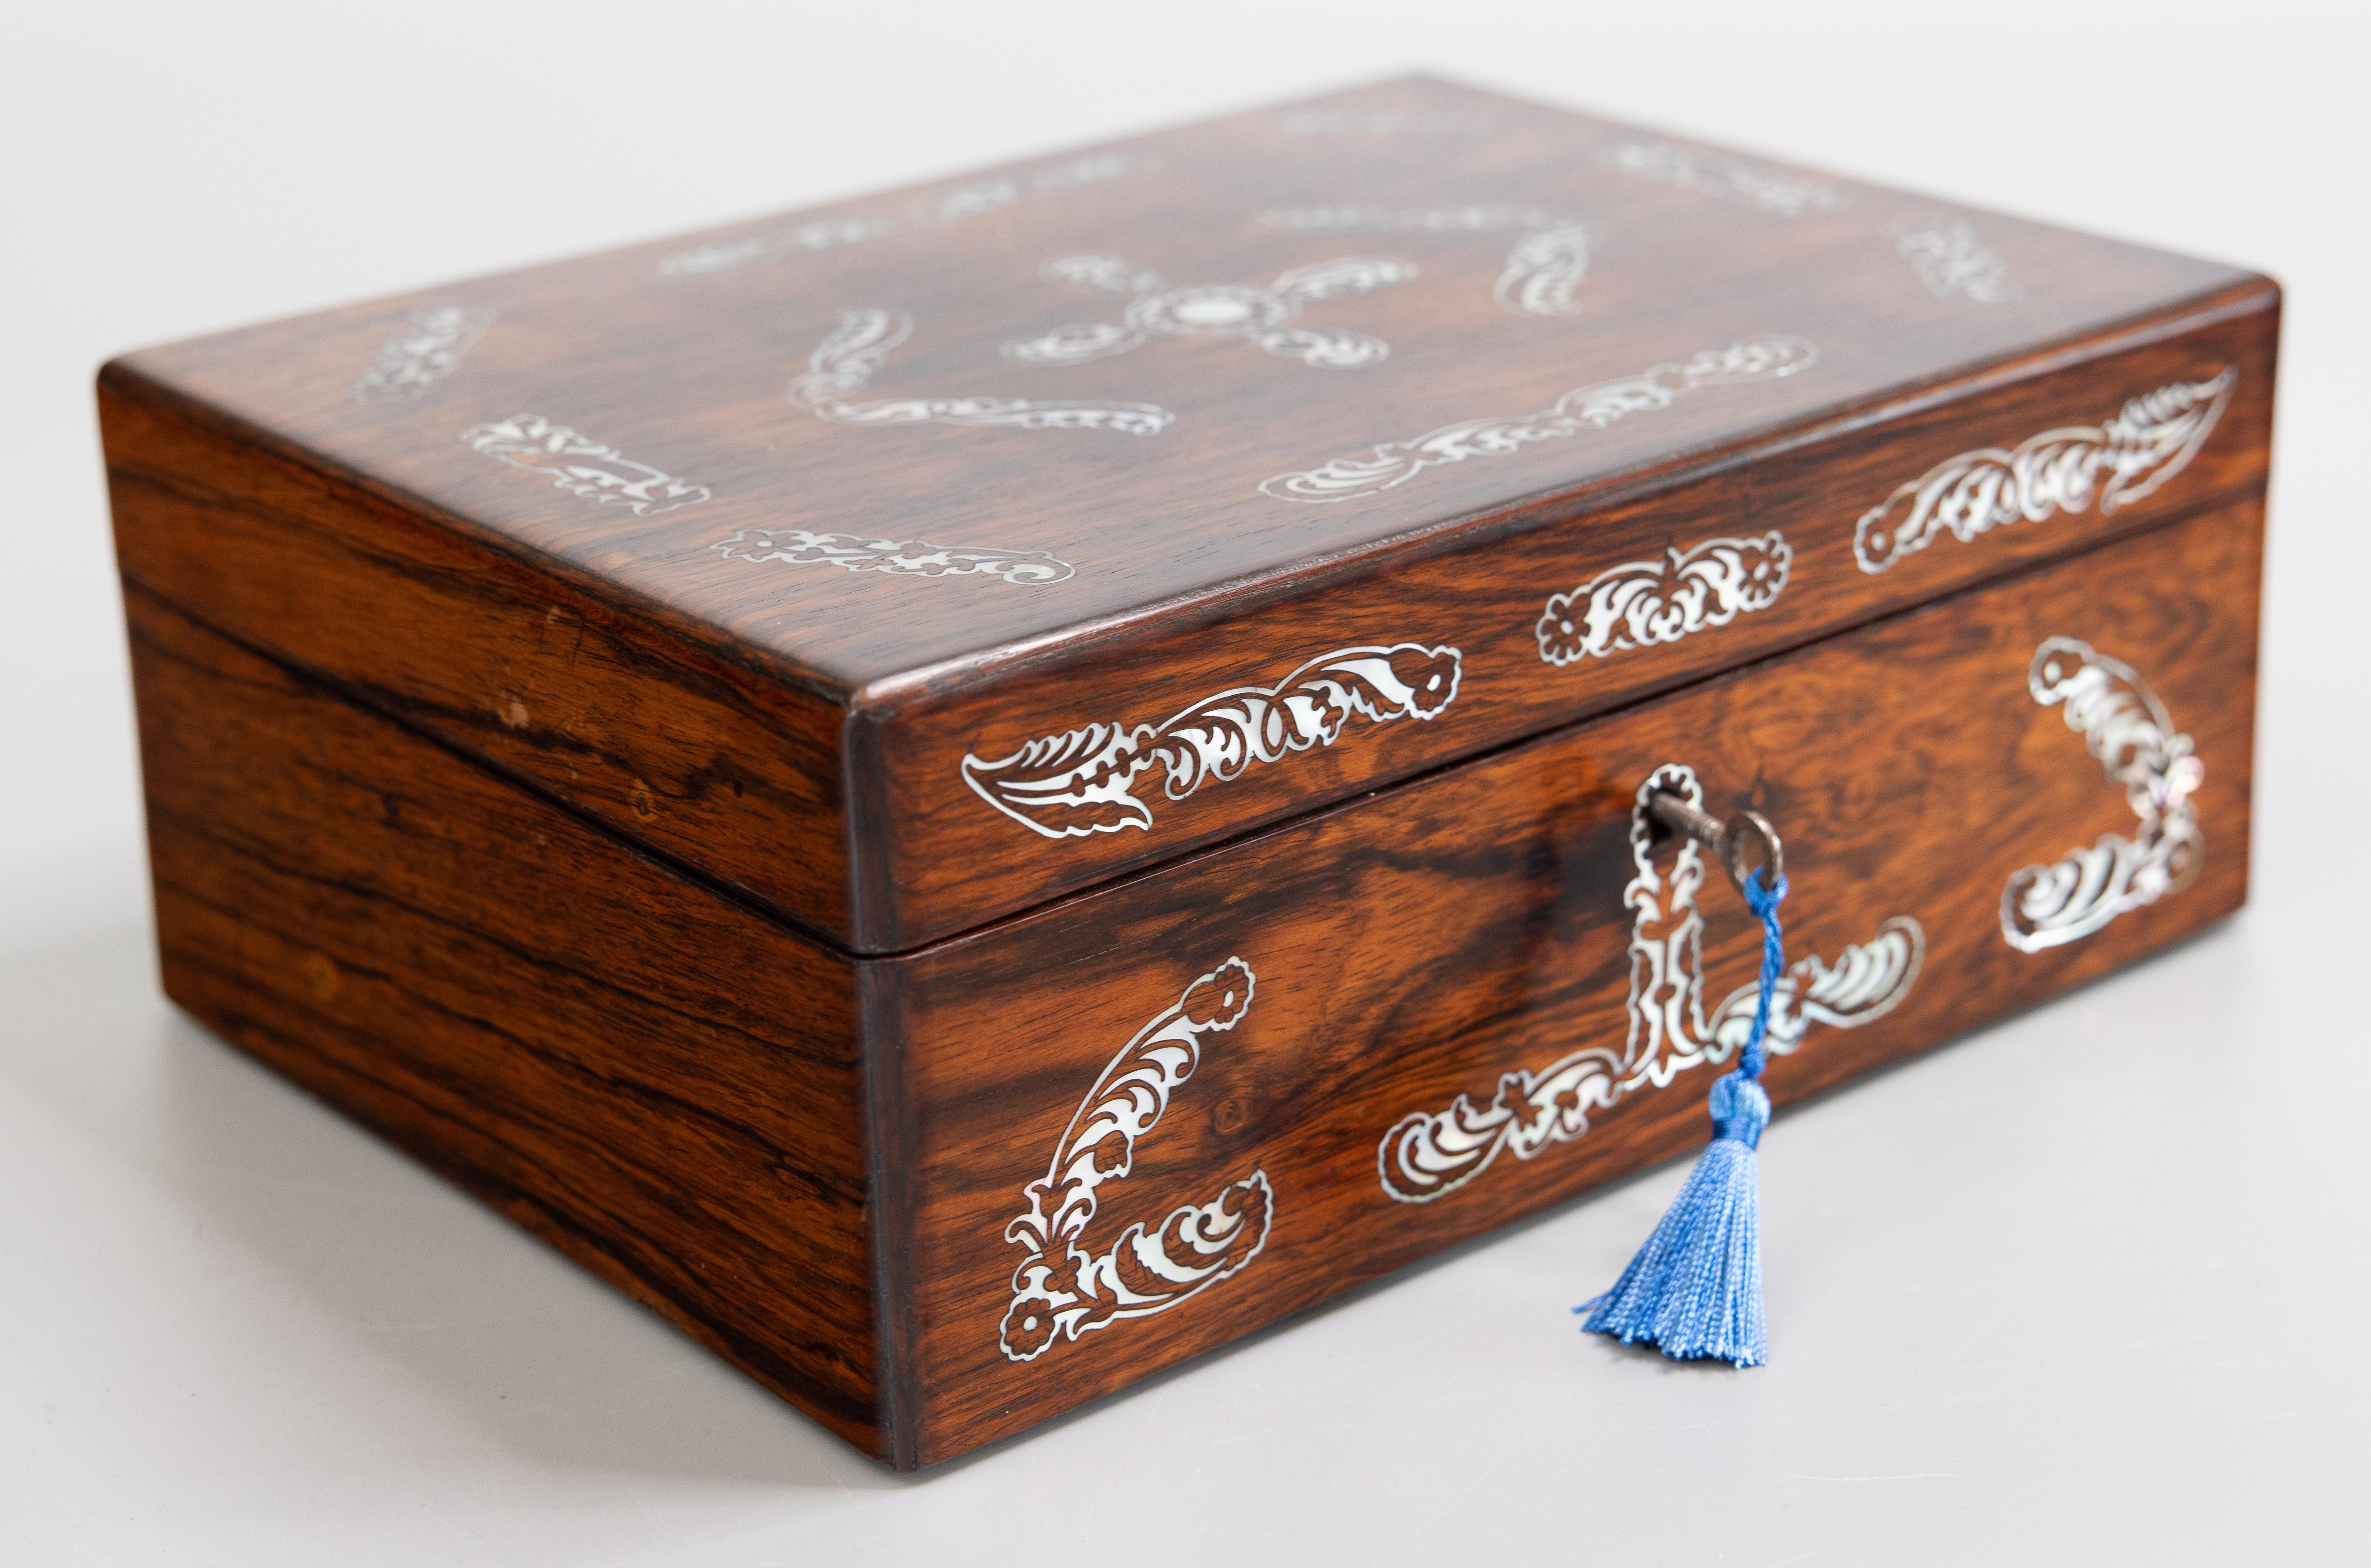 A superb antique Victorian English rosewood jewellery box with fitted interior, a removable inner jewellery tray, and fully working lock and key, circa 1850. The lid and front of this exquisite box are decorated with finely inlaid mother of pearl